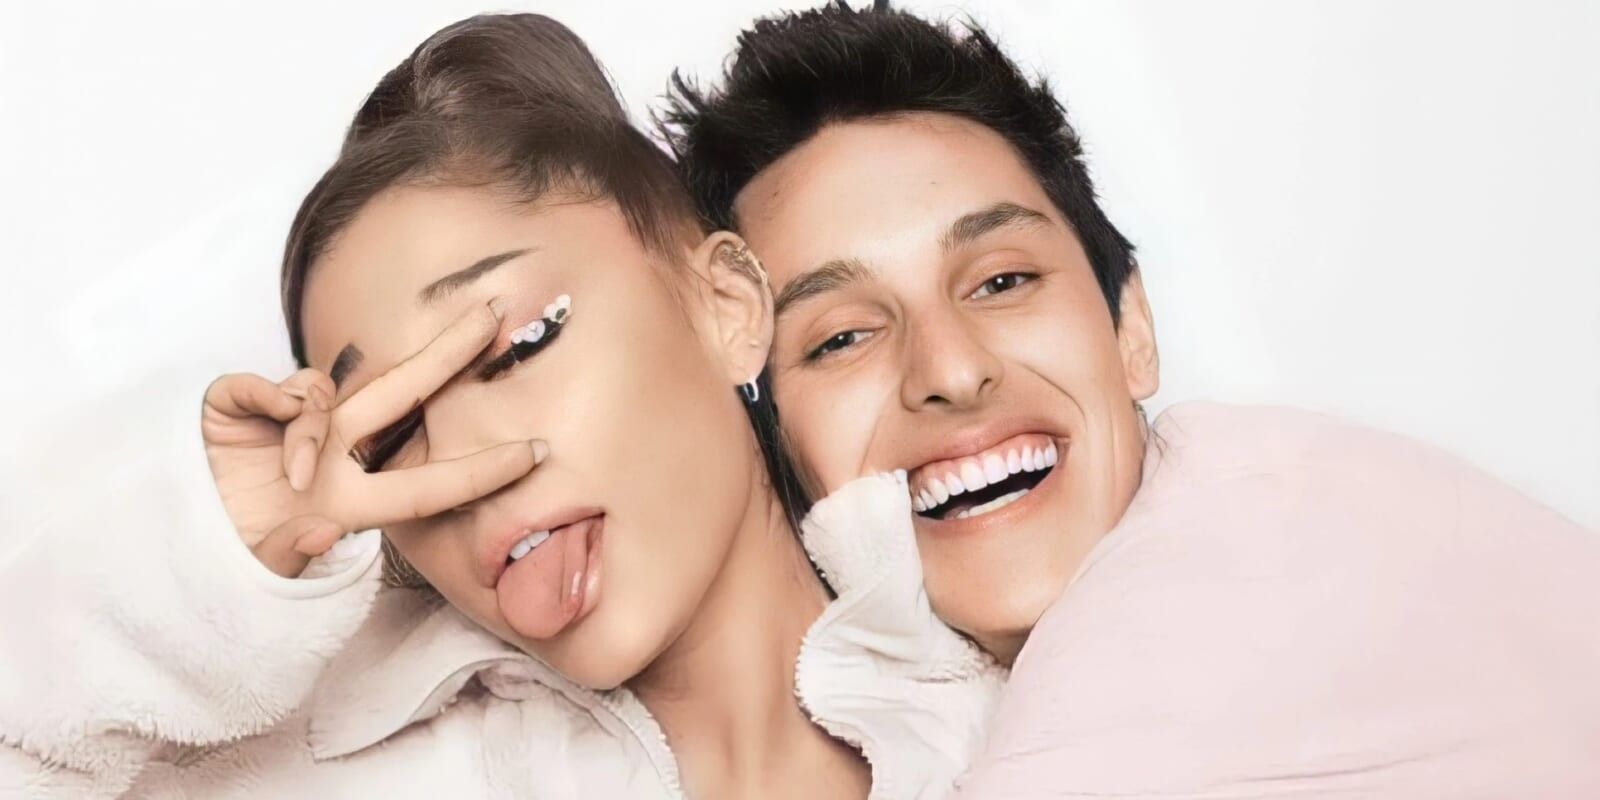 Ariana Grande sticking out her tongue at the camera with husband Dalton Gomez.